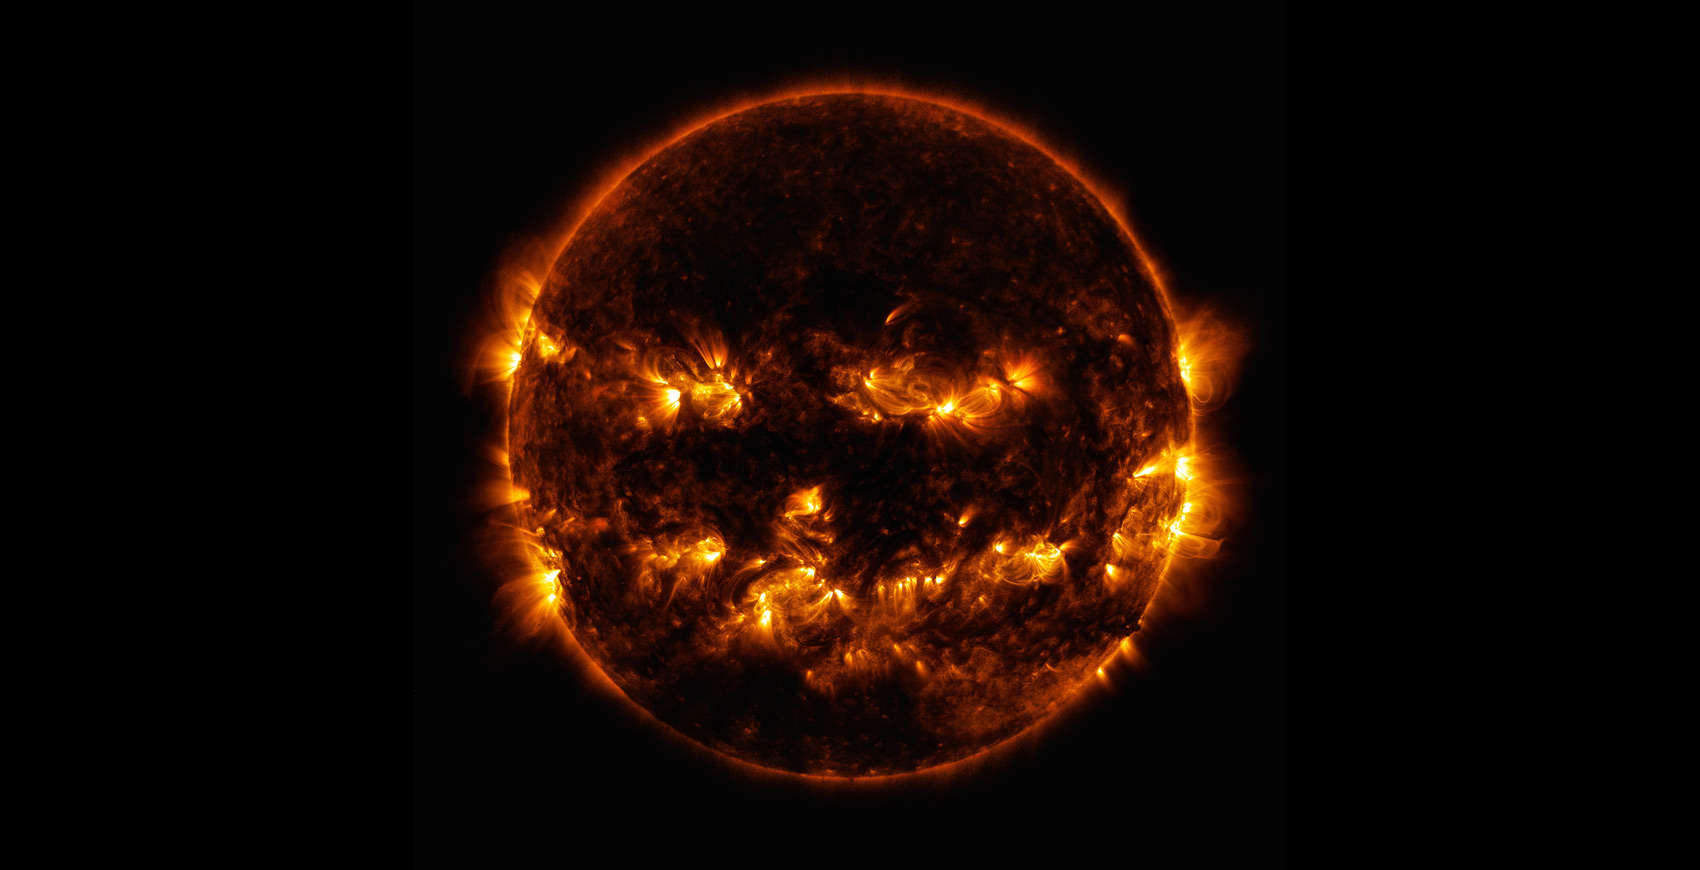 The Sun as seen by the Solar Dynamics Observatory in extreme ultraviolet (17.1 and 19.3 nanometers) makes it look like a pumpkin; magnetic activity was near its peak at the time. Credit: NASA/GSFC/SDO